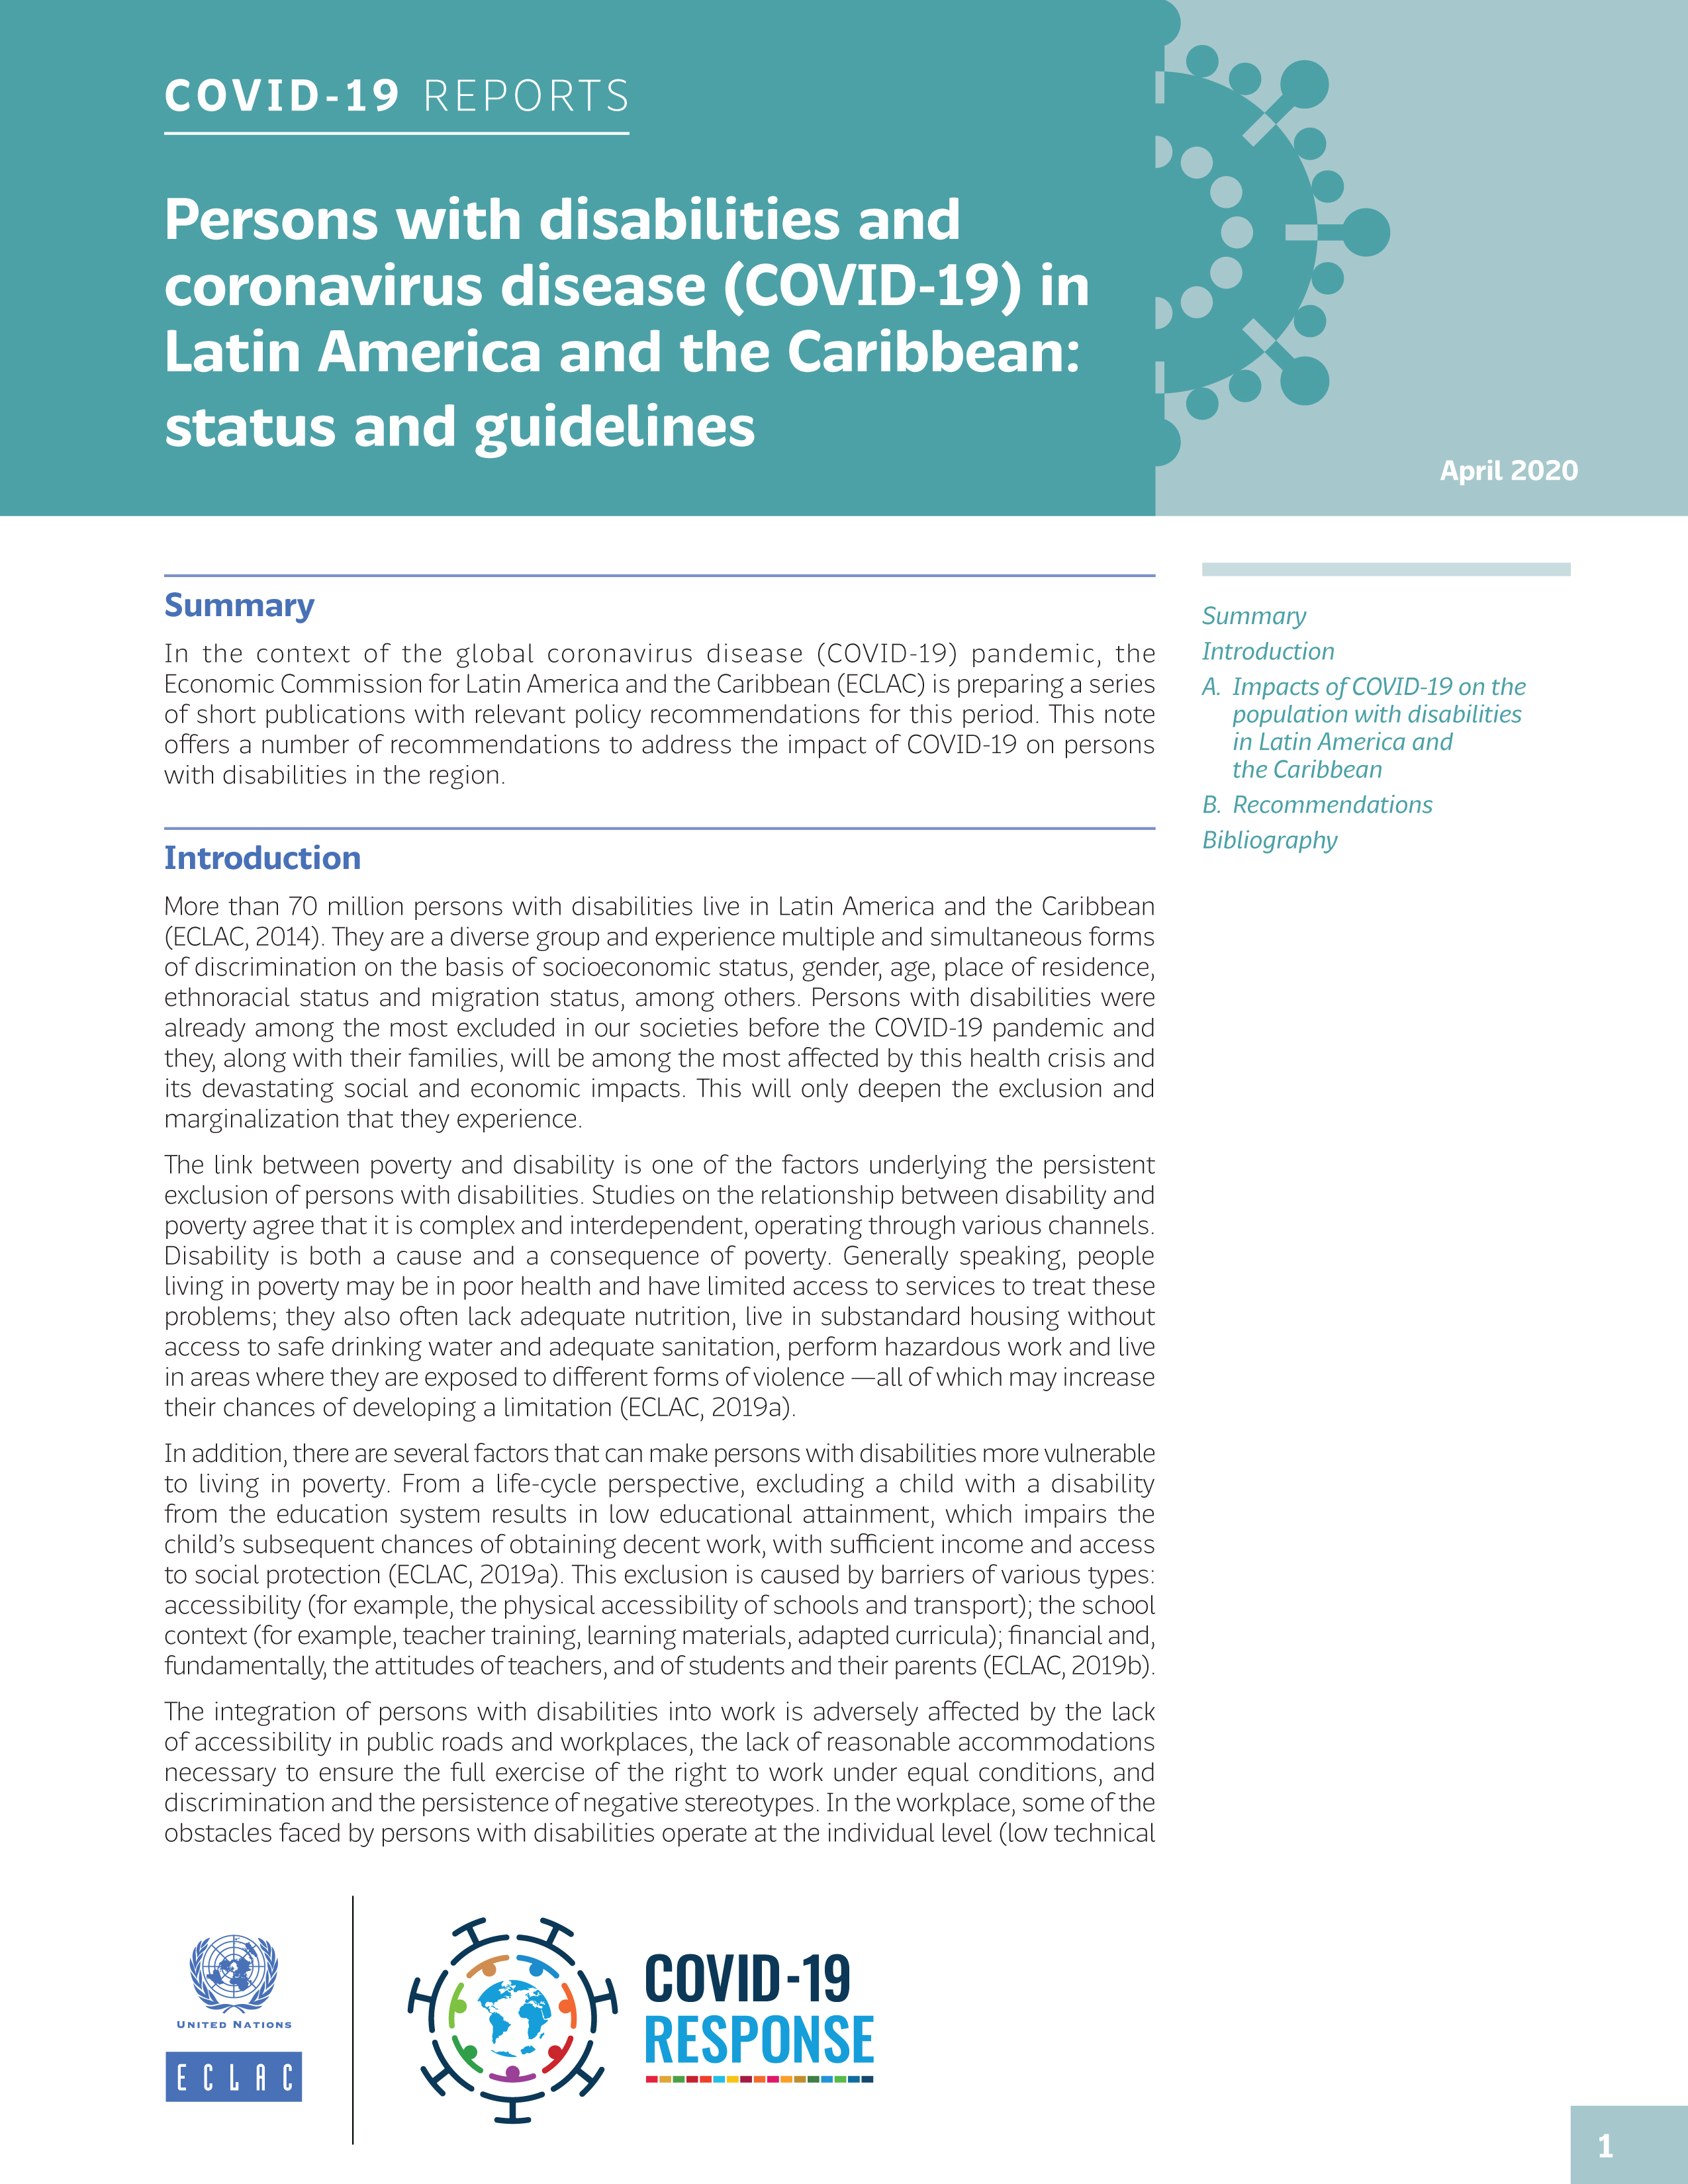 image of Persons with Disabilities and Coronavirus Disease (COVID-19) in Latin America and the Caribbean: Status and Guidelines